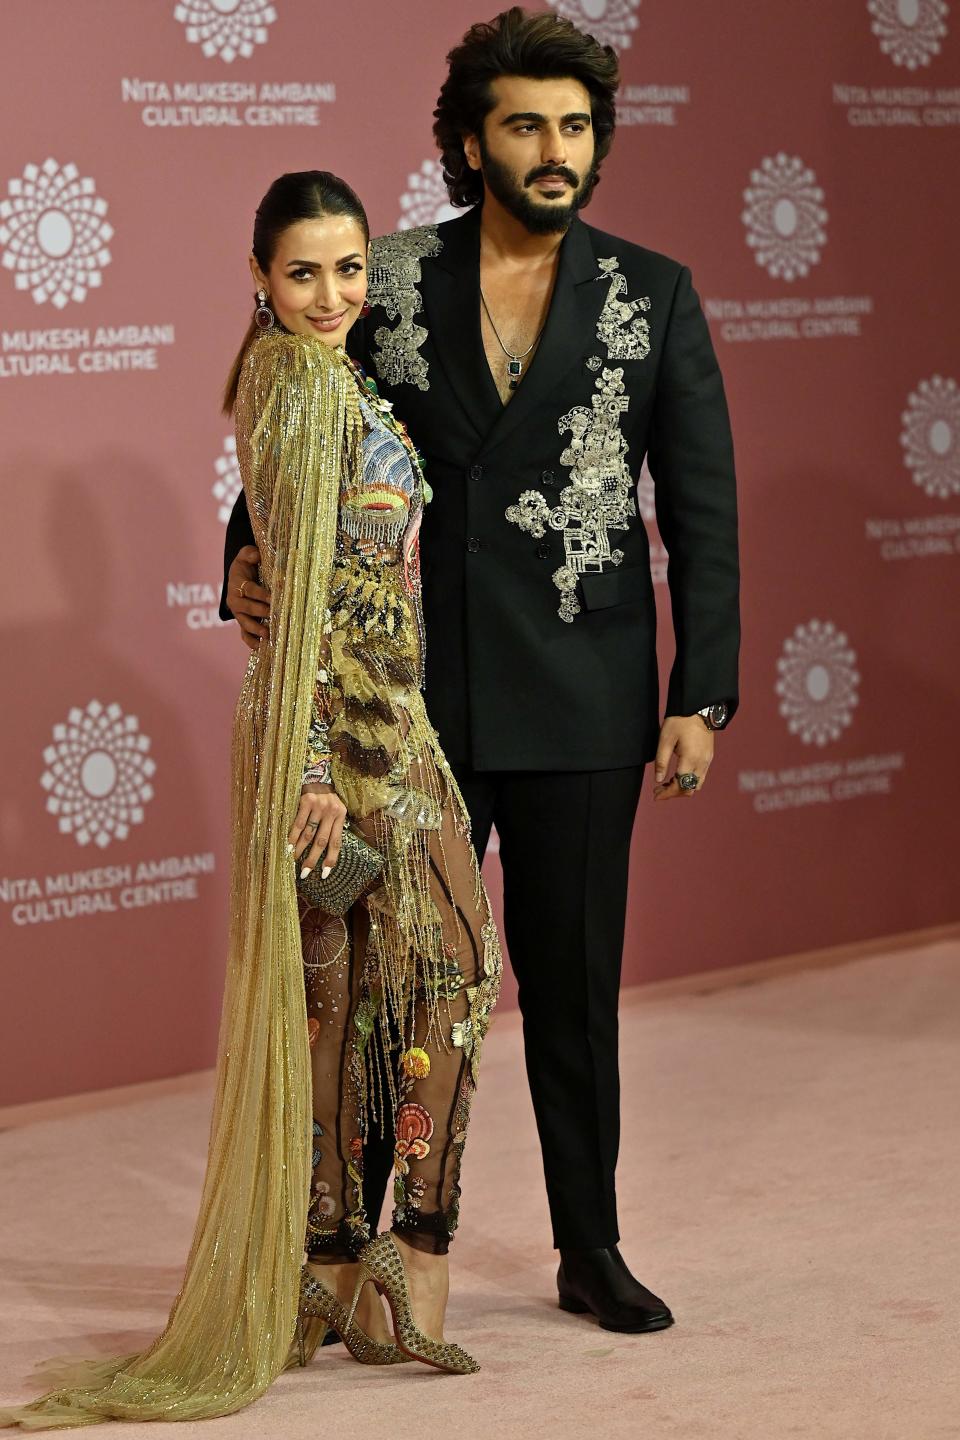 Bollywood actors Malaika Arora, left, and Arjun Kapoor strike a stylish pose, with Arora donning a flowy gold ensemble and Kapoor rocking a graphic black suit.